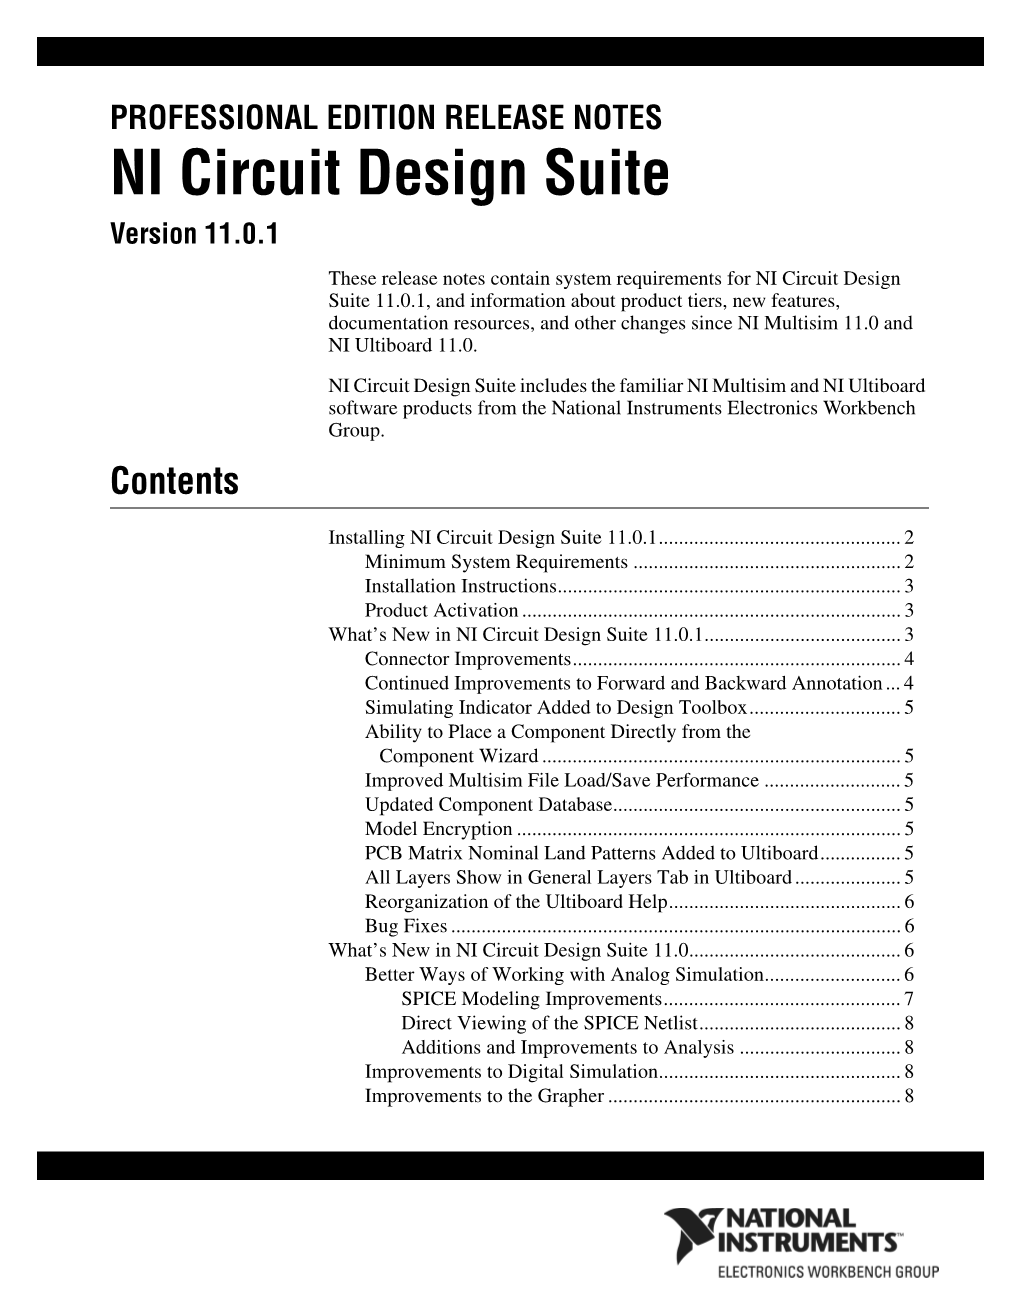 Archived: NI Circuit Design Suite Professional Edition Release Notes